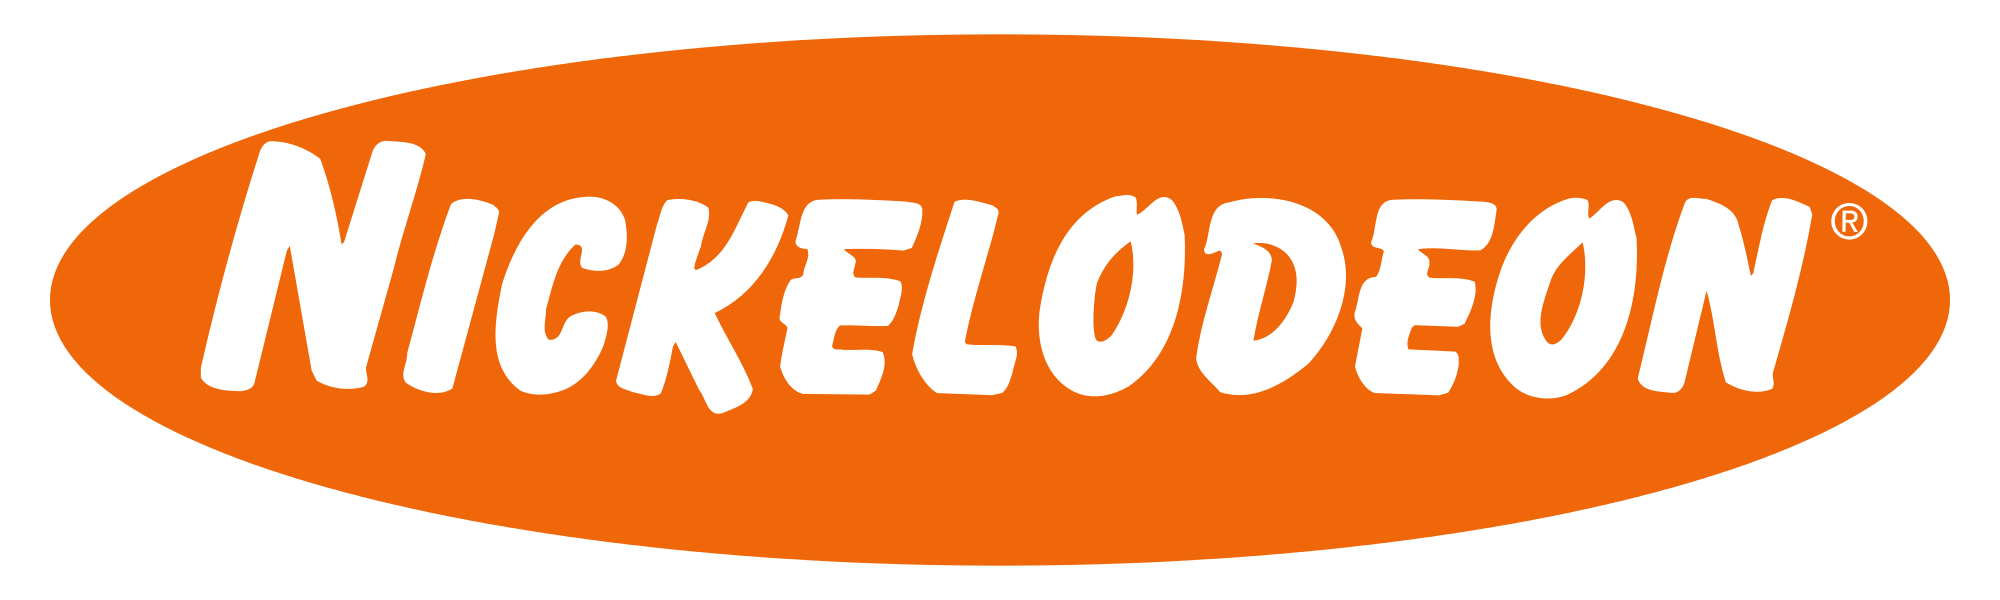 Nickeleodeon Logo - Meaning Nickelodeon logo and symbol | history and evolution